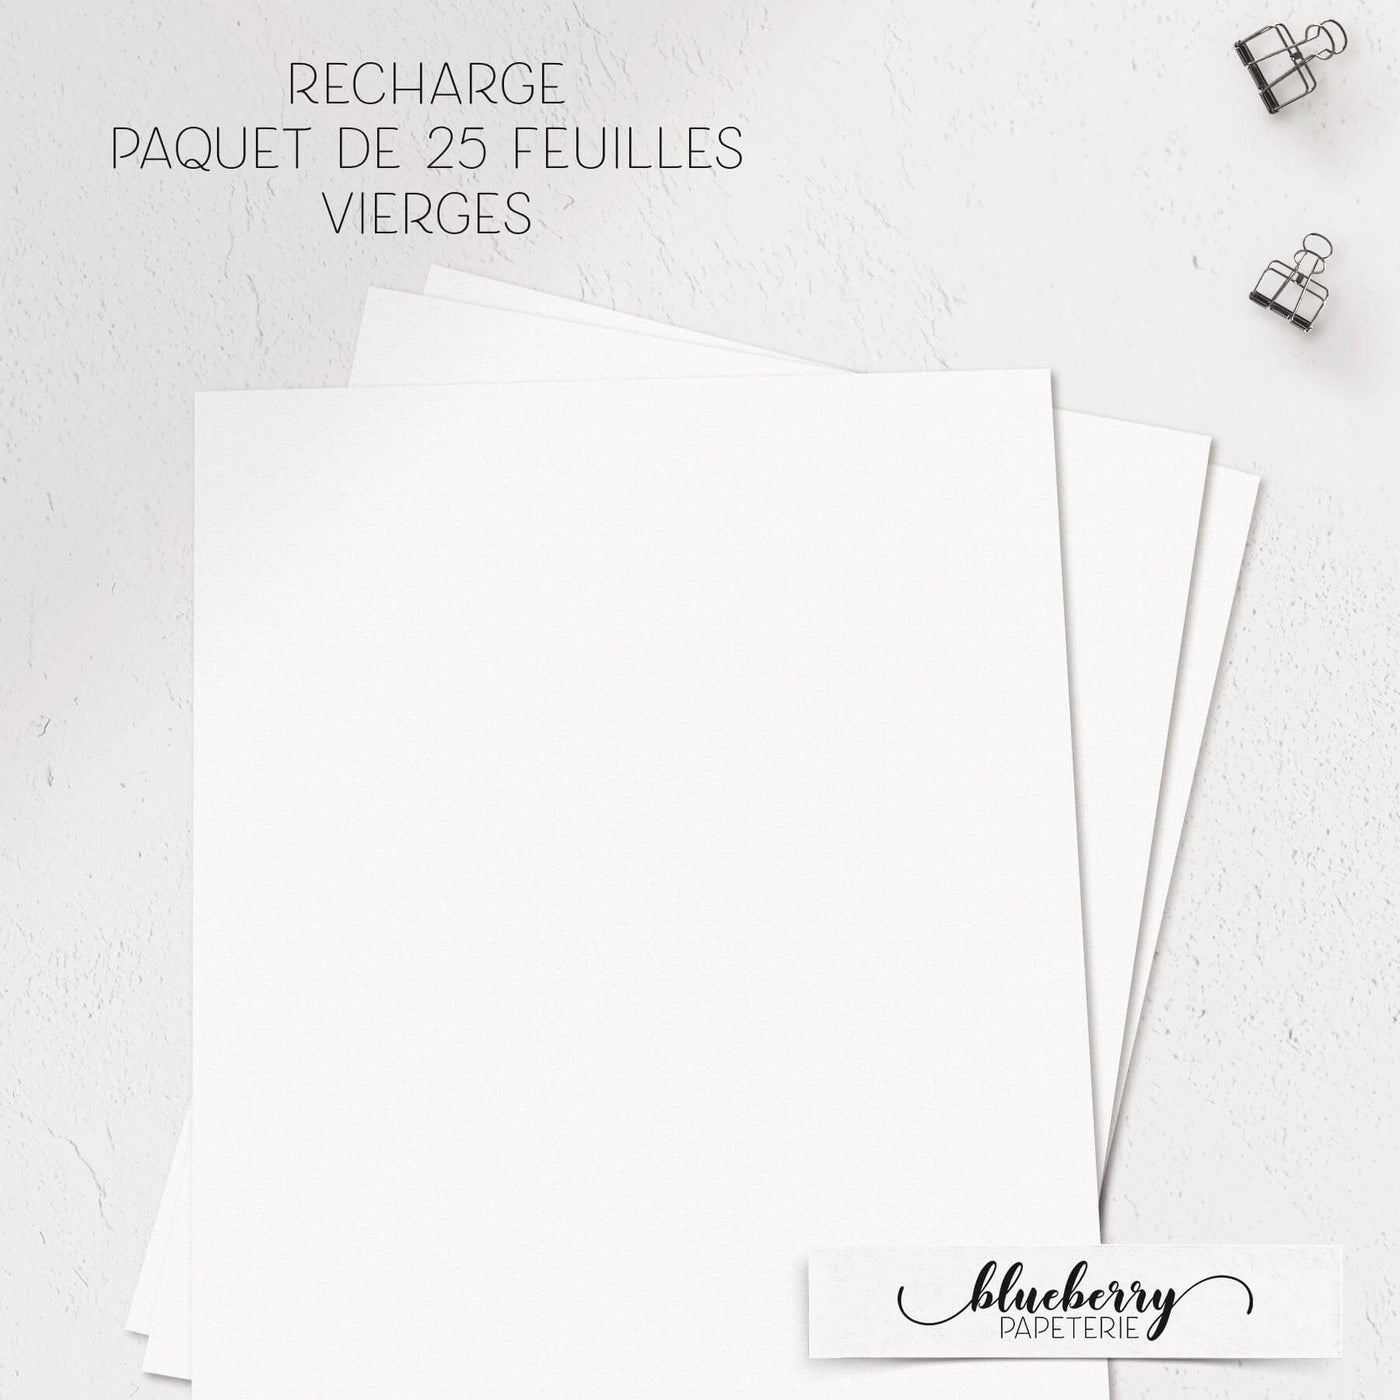 Recharge - 25 Feuilles vierges - Blueberry Papeterie